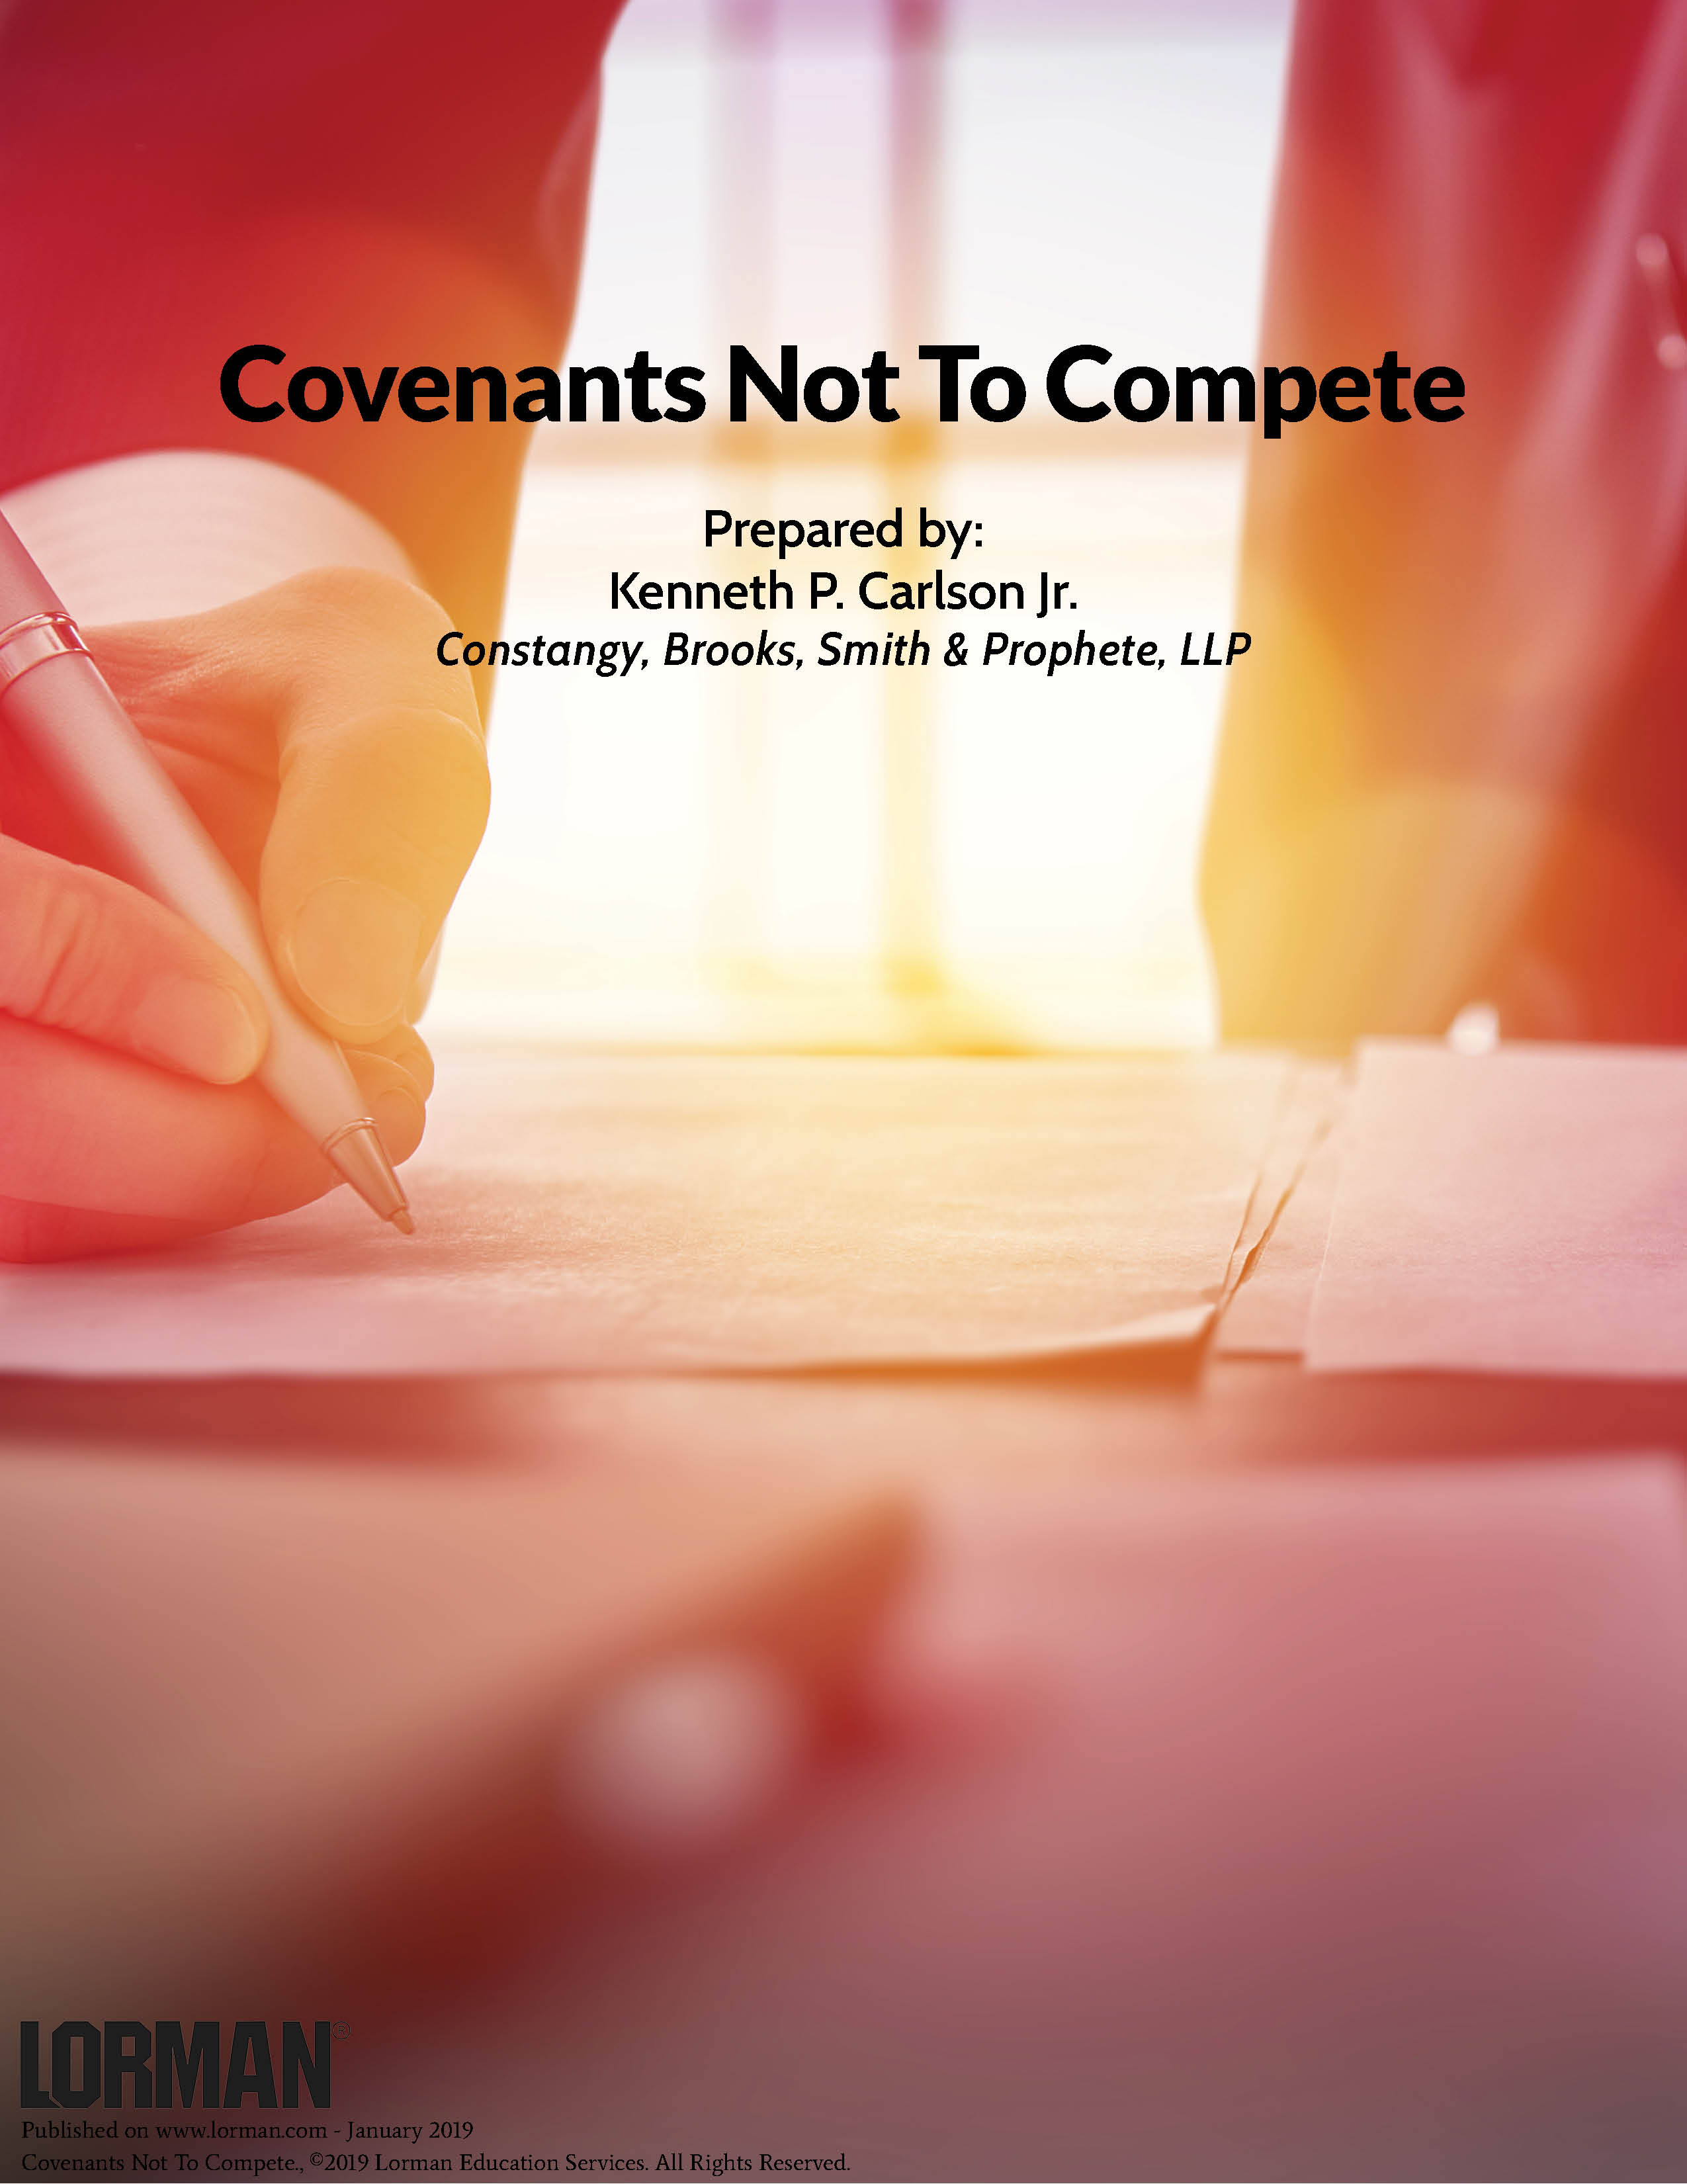 Covenants Not to Compete